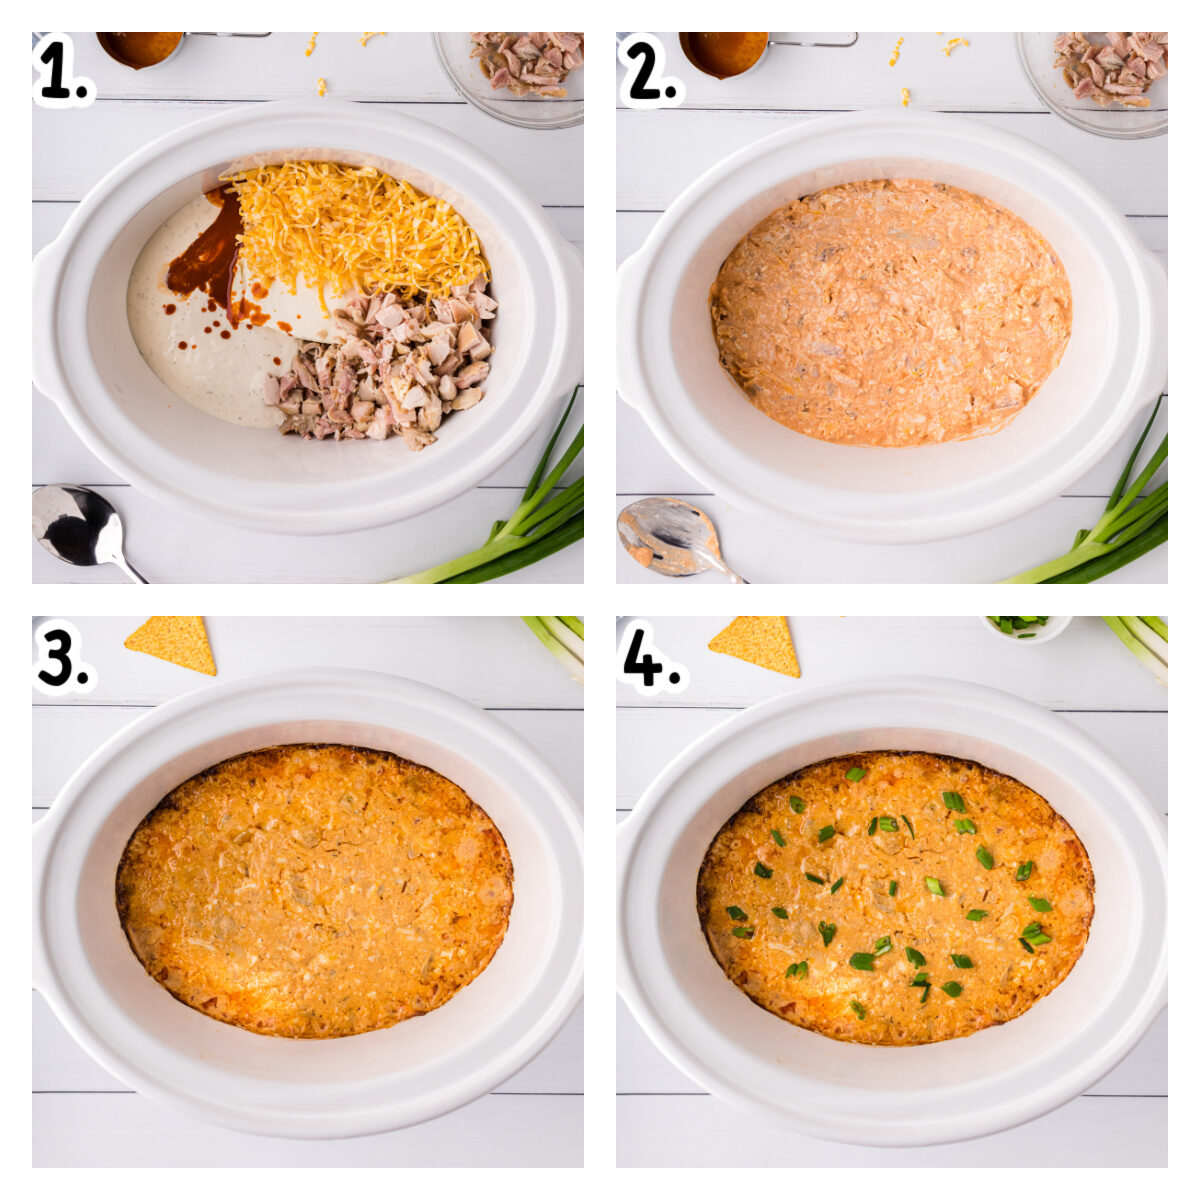 4 images about how to make tapatio chicken dip in a crockpot.